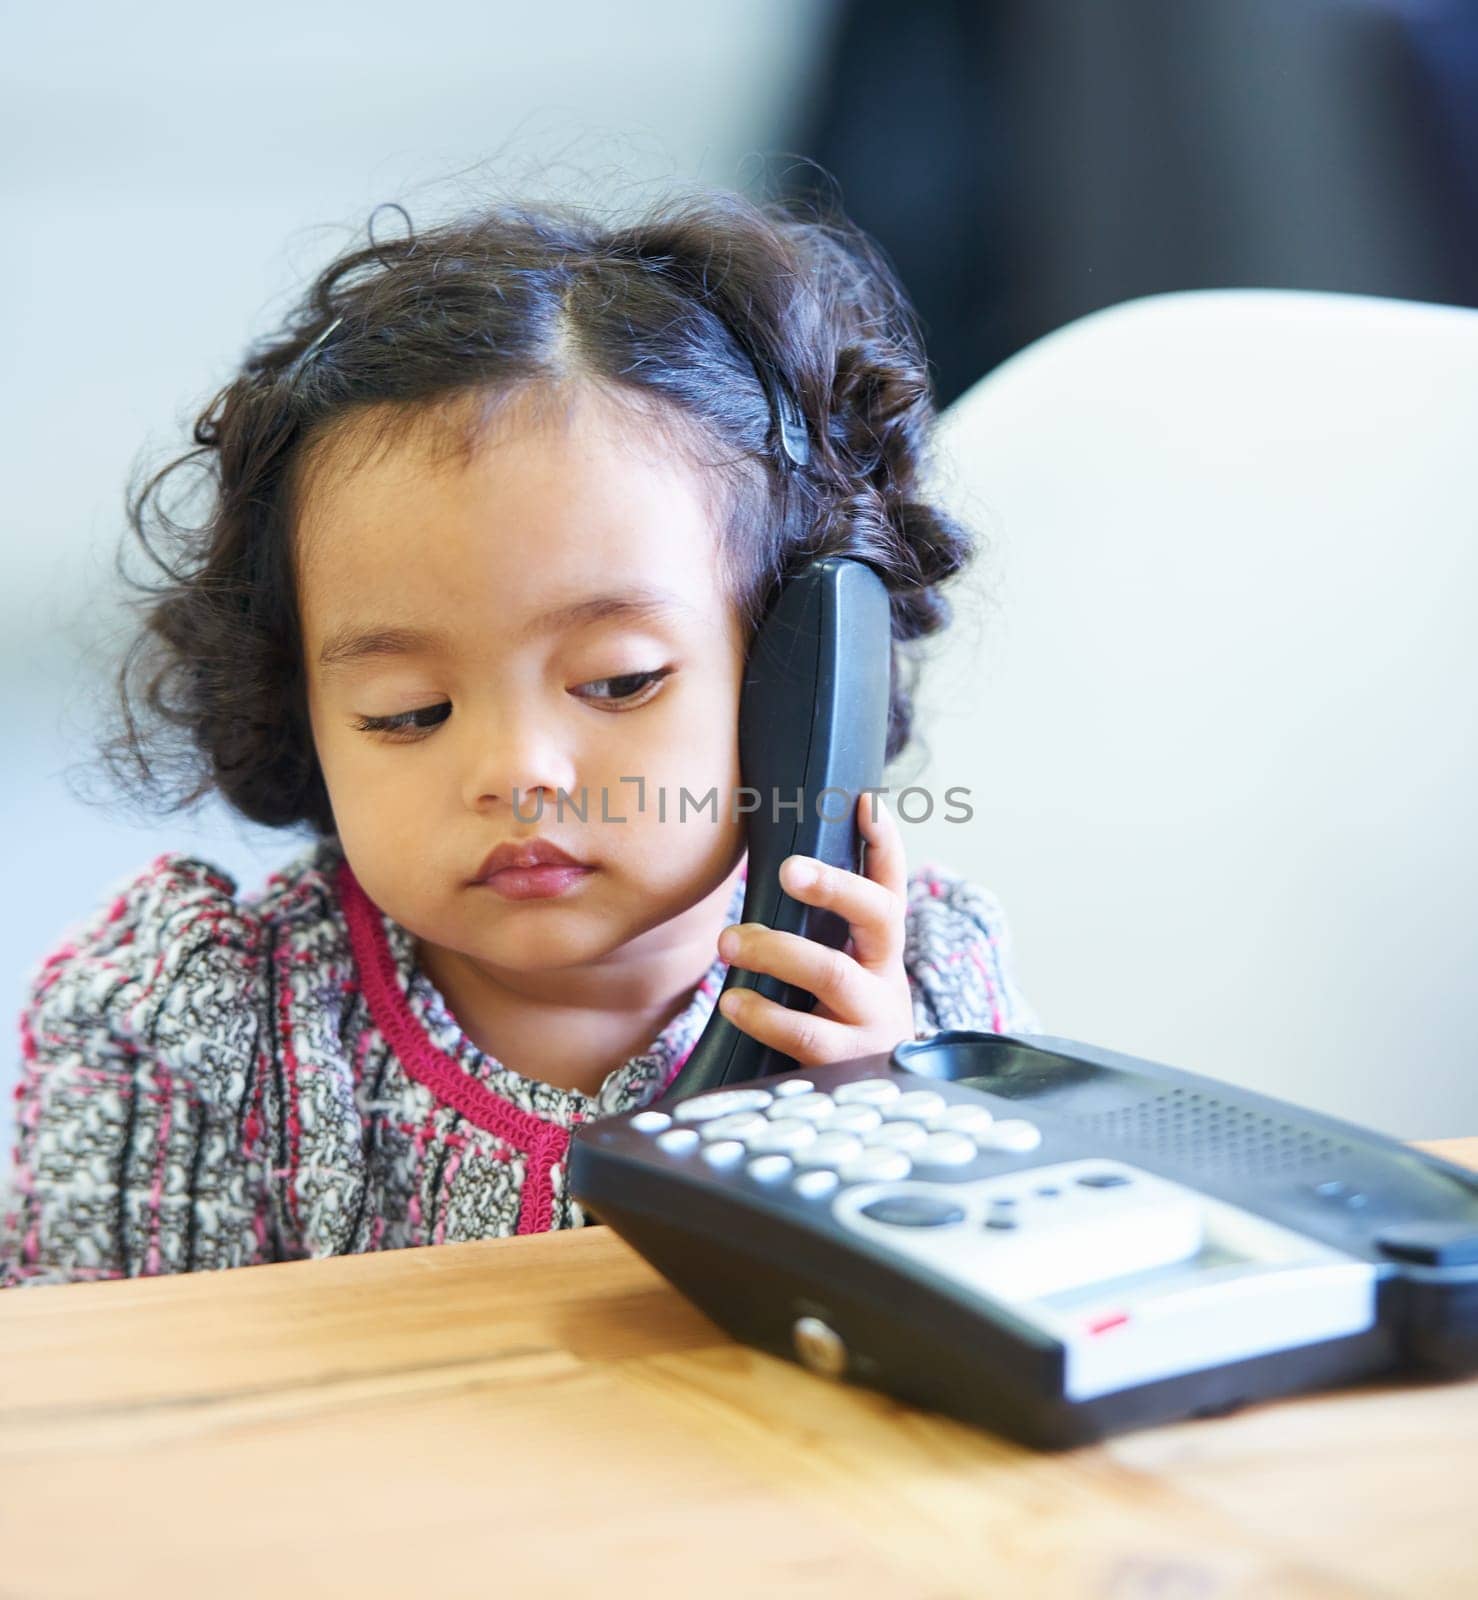 Listening, talking and a child on a telephone phone call for communication in a house. Home, contact and a girl, kid or baby speaking on a landline for conversation, play or a discussion at a desk by YuriArcurs